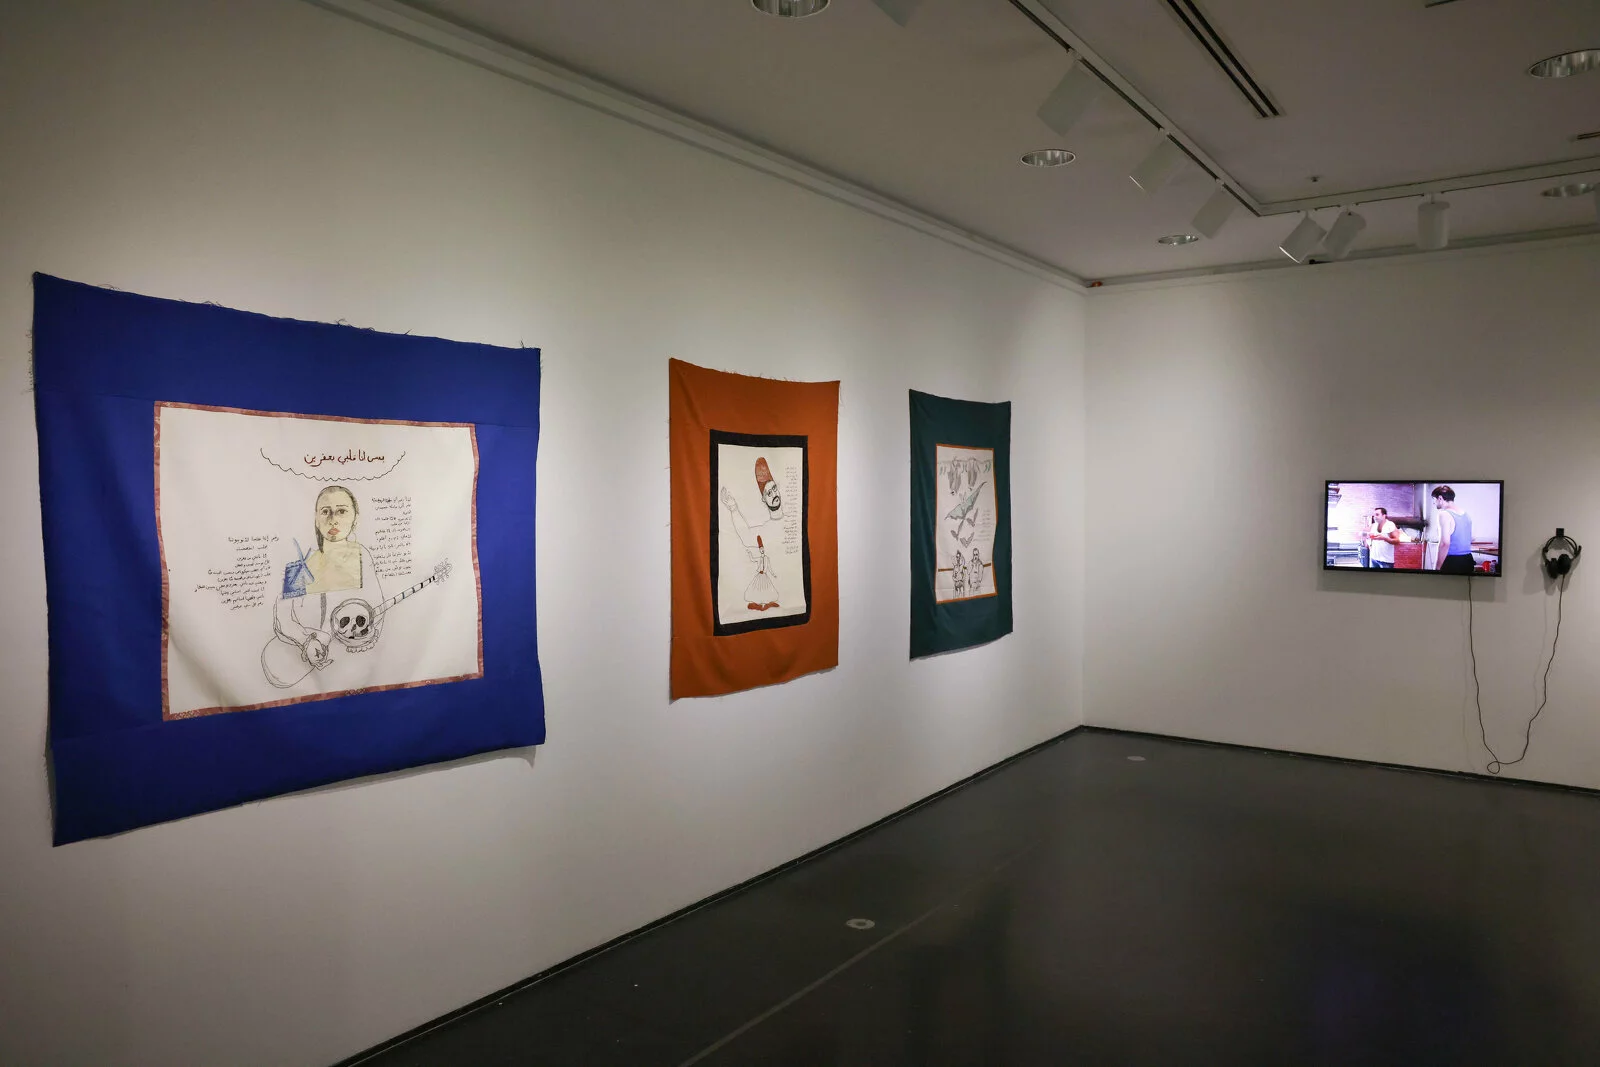 A corner of a dim gallery space with three works on the left wall; a video artwork is just visible on the right.